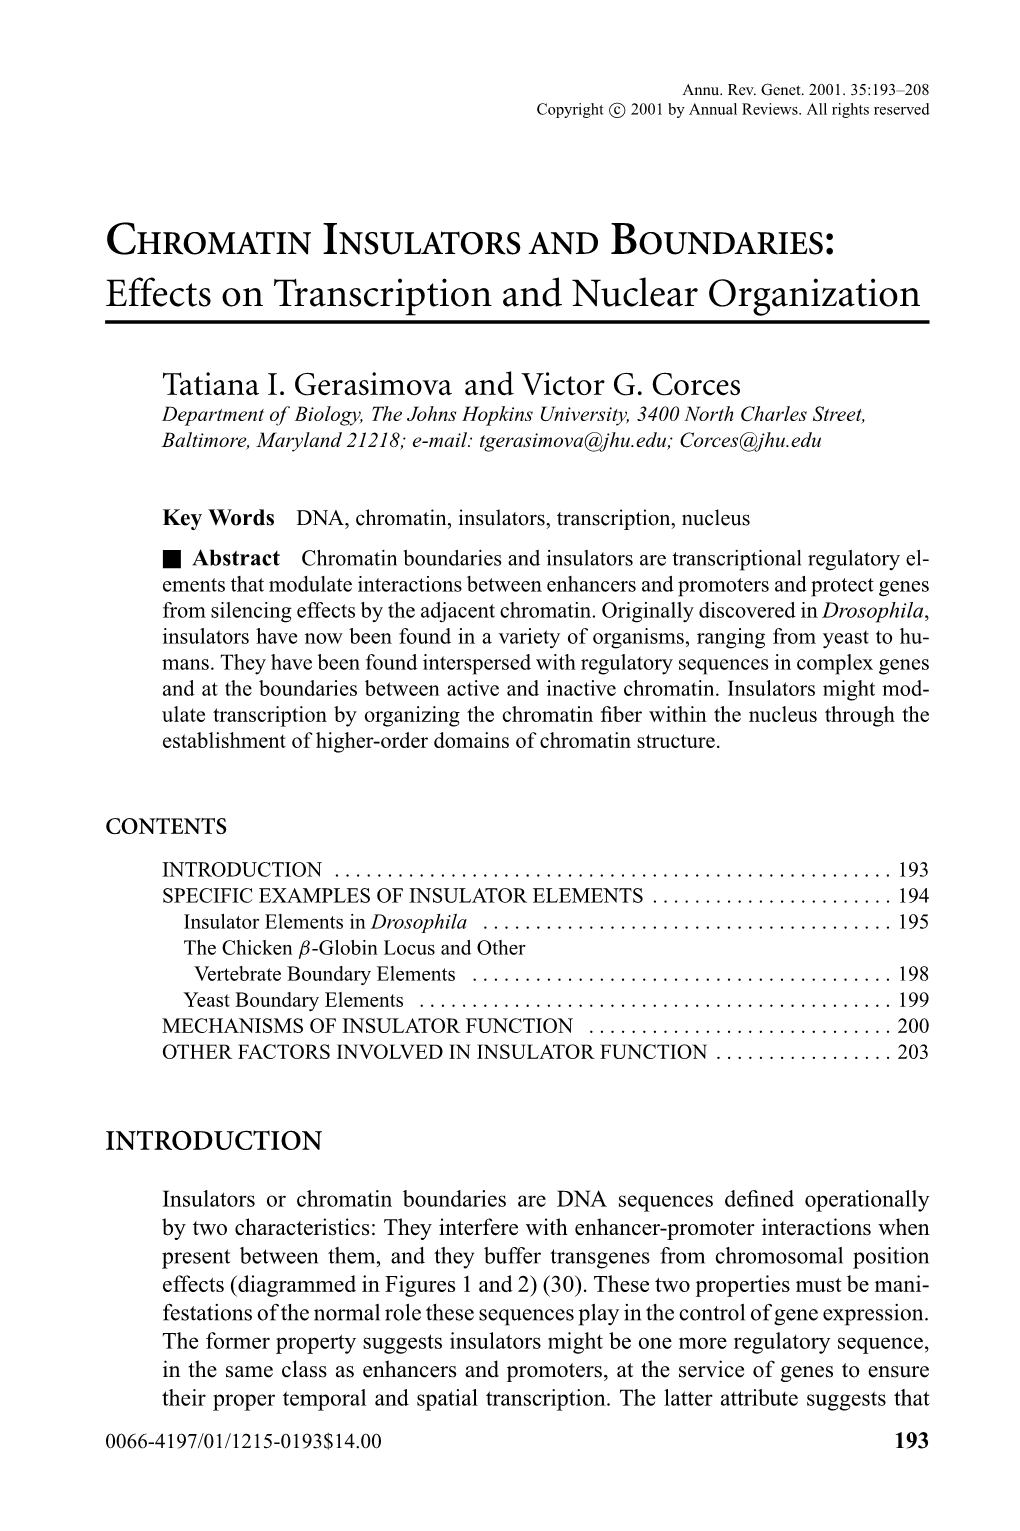 Effects on Transcription and Nuclear Organization